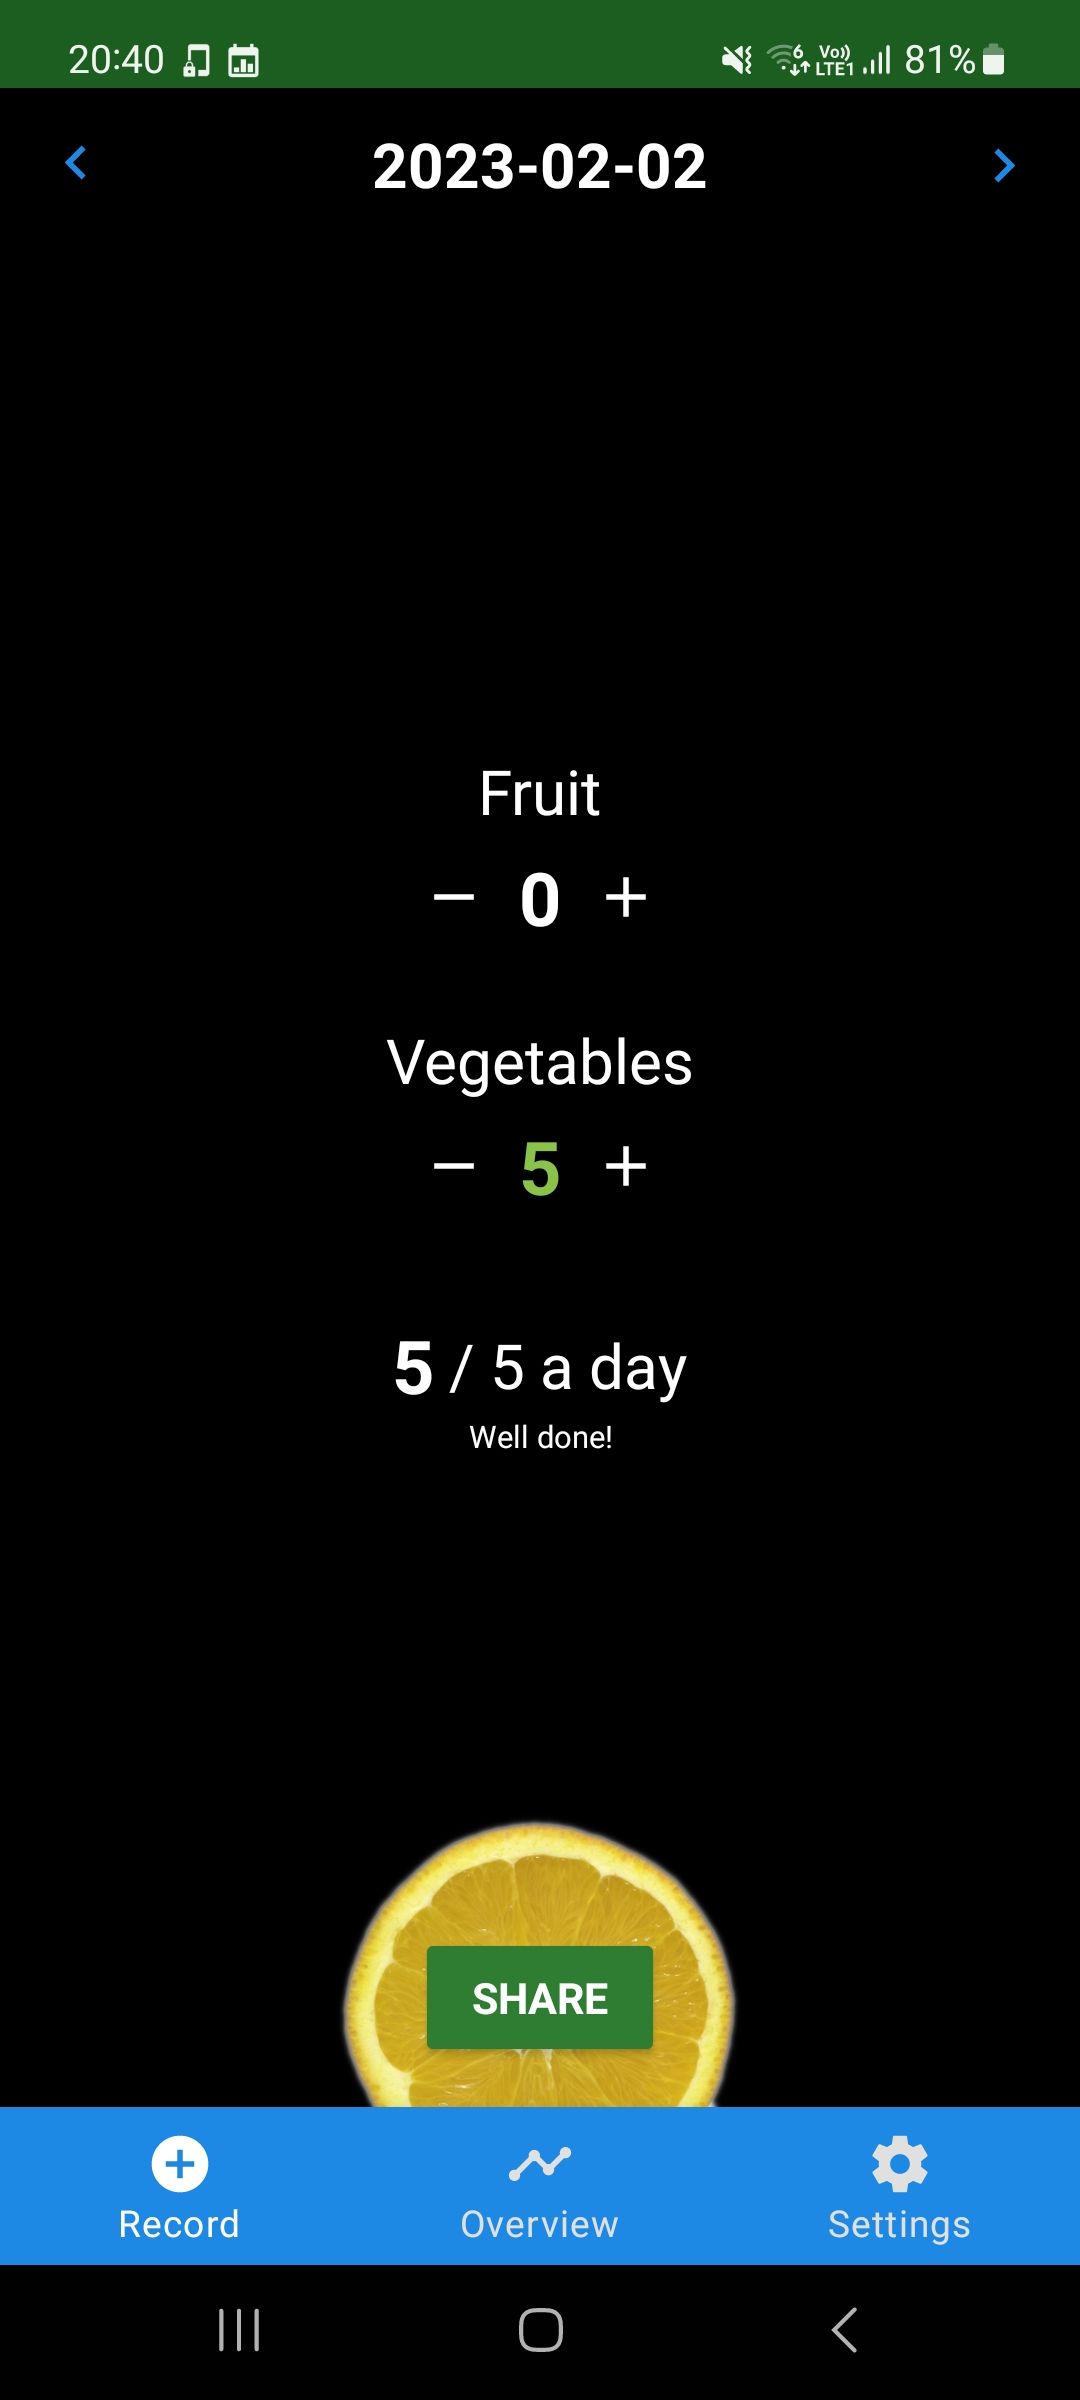 5 a day daily vegetable and fruit intake